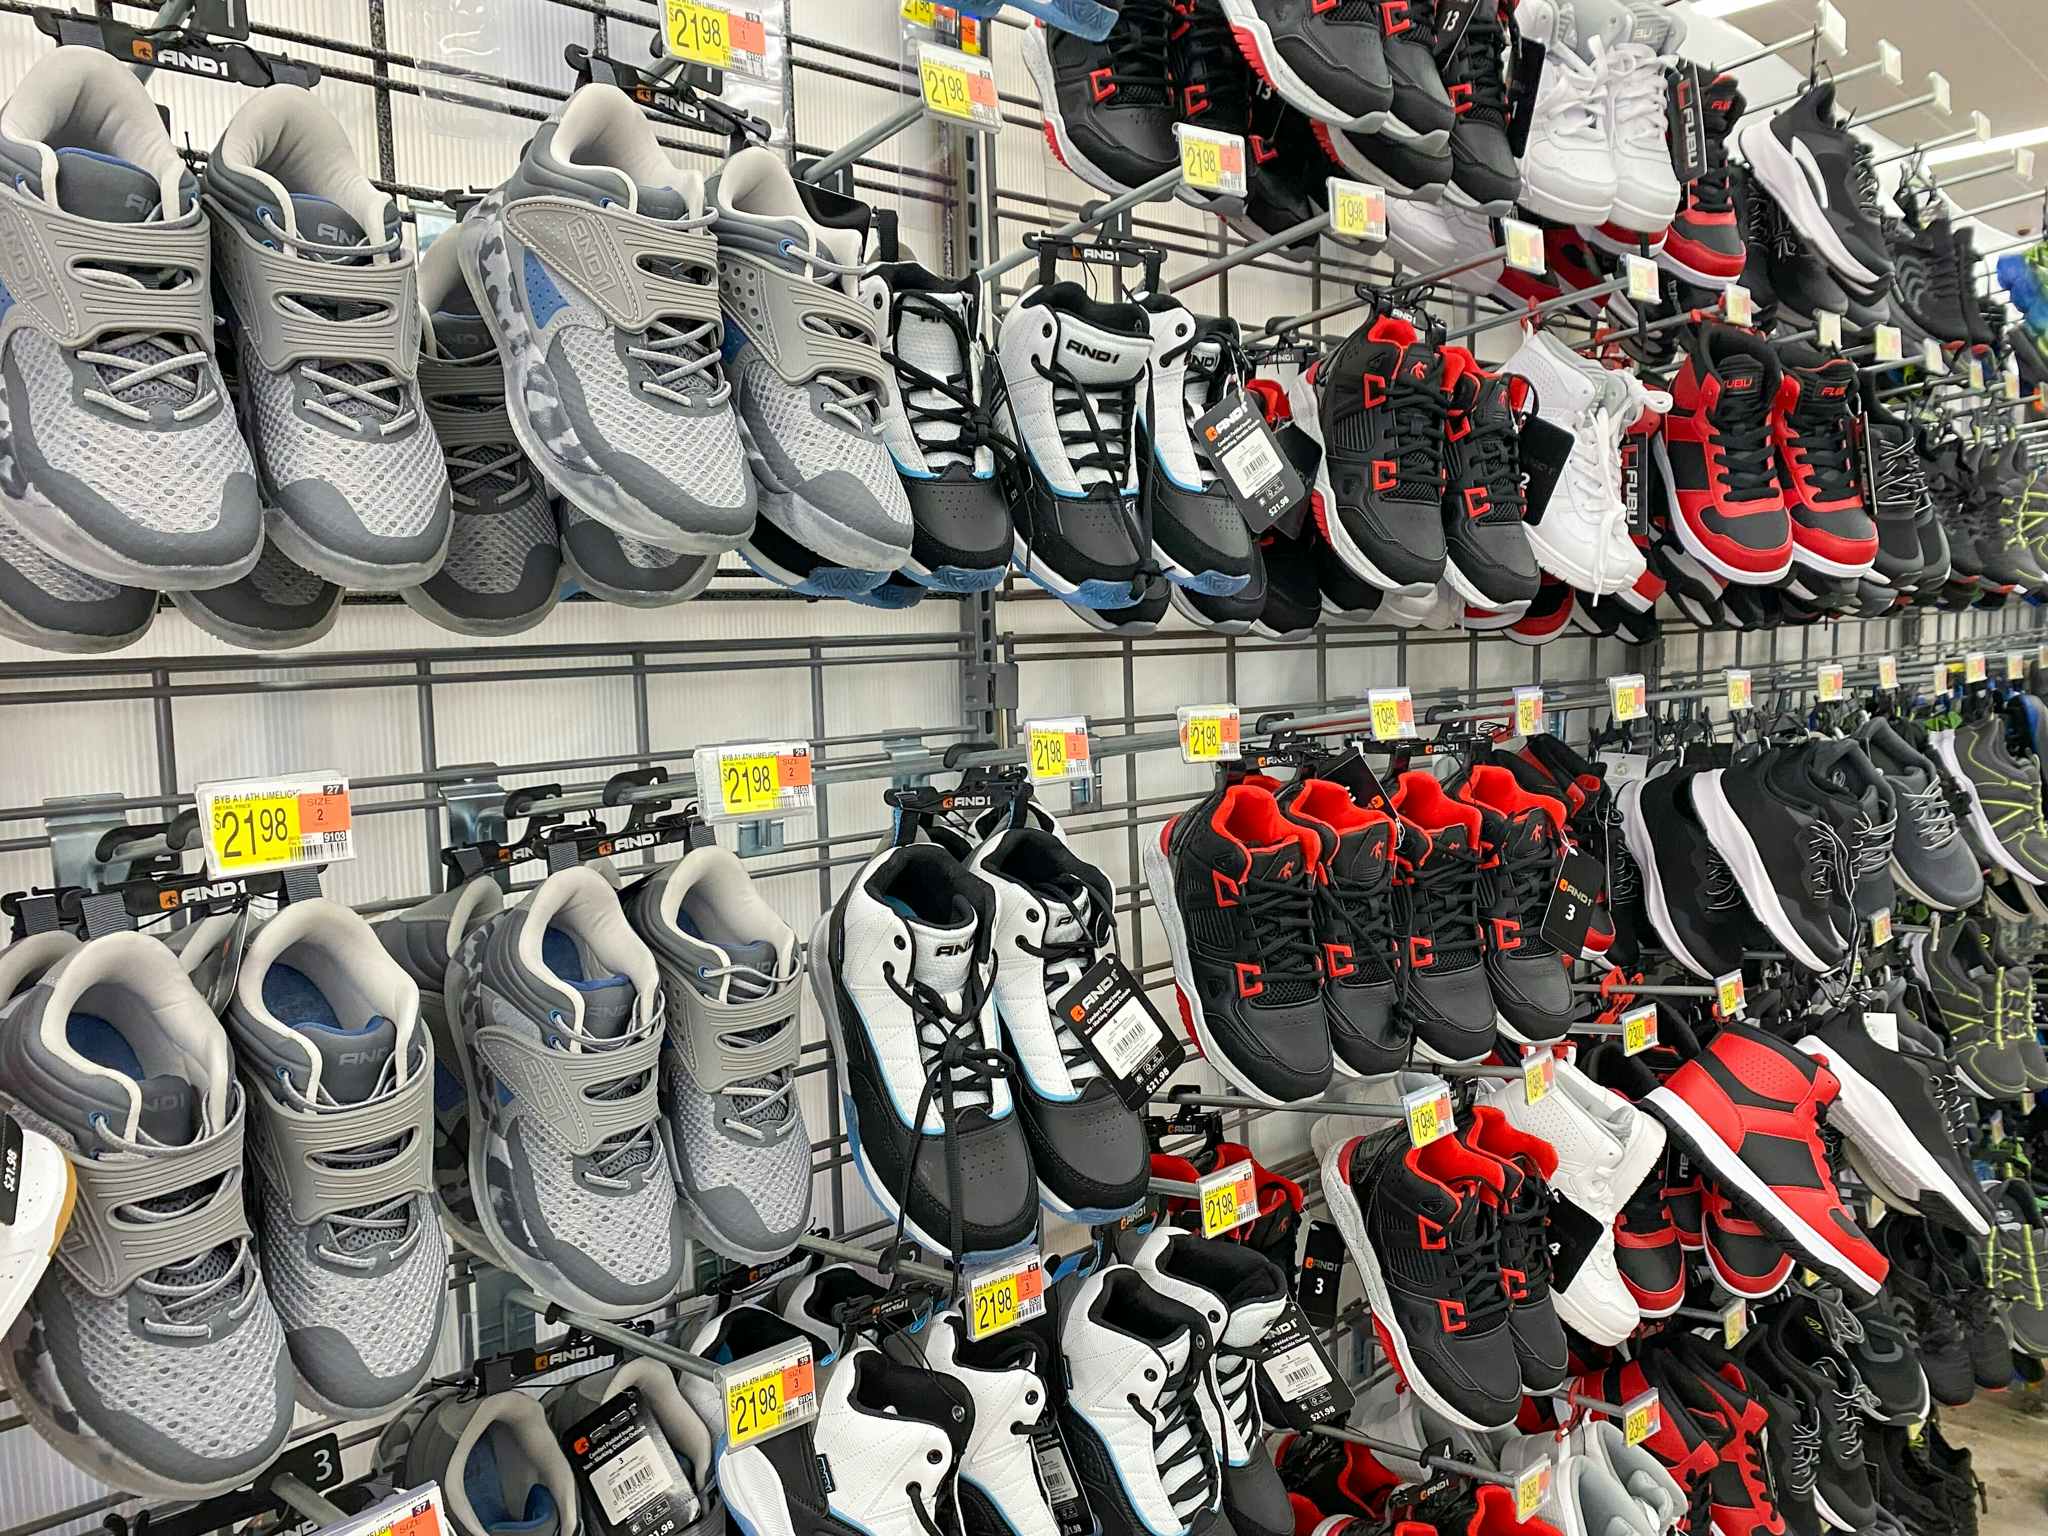 Kids' Basketball Sneakers on Clearance, Now Only $10 at Walmart